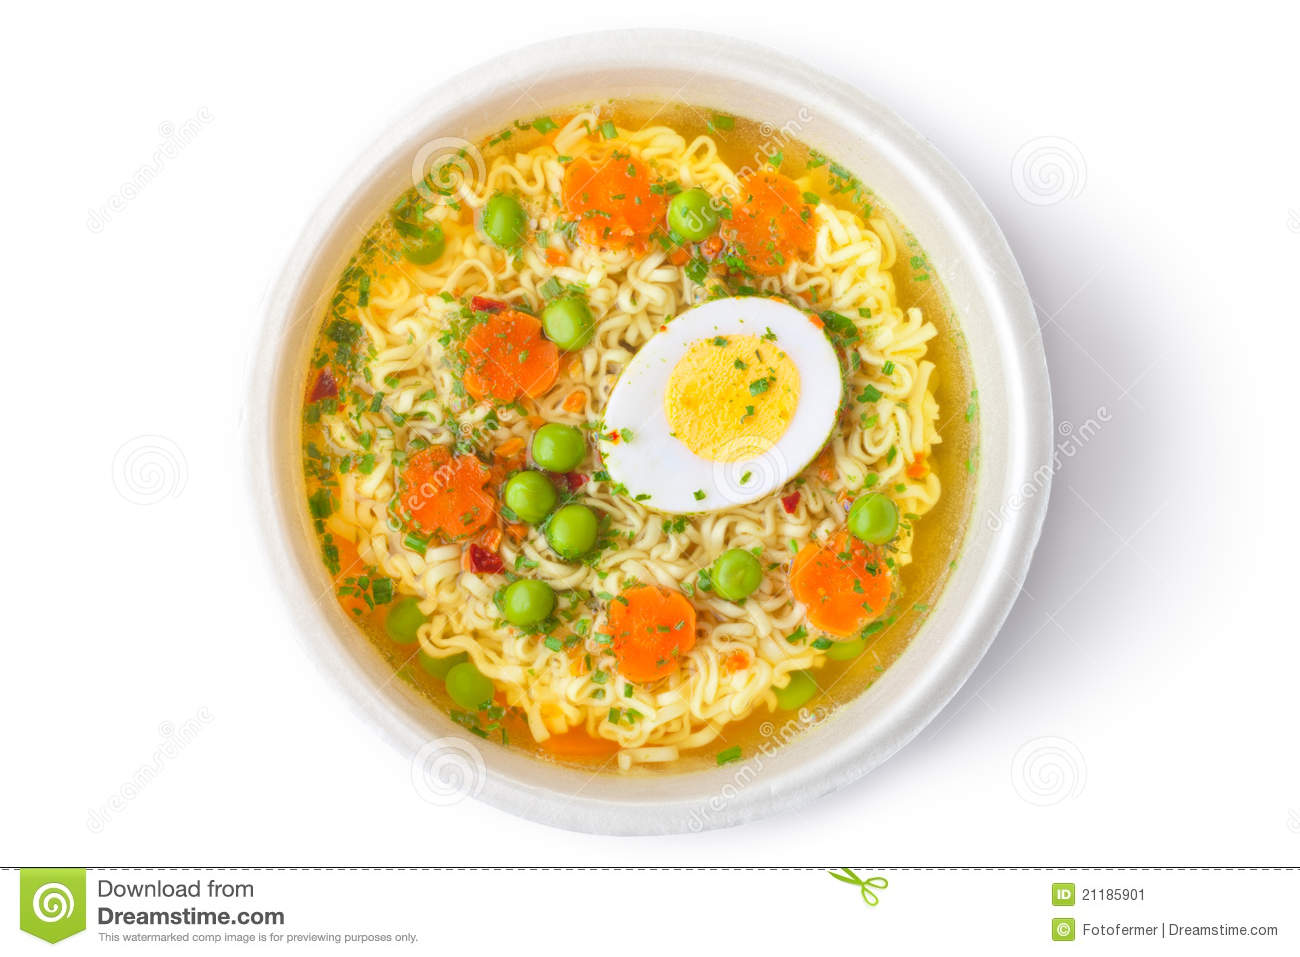 Cup Of Instant Noodles With Vegetables Stock Image   Image  21185901